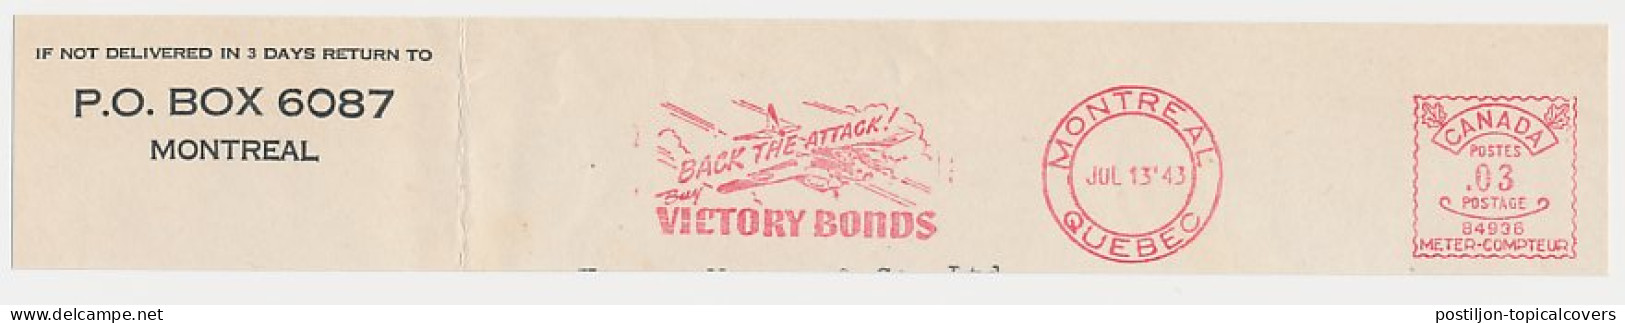 Meter Top Cut Canada 1943 Jet Fighter - Back The Attack - Victory Bonds - WW2